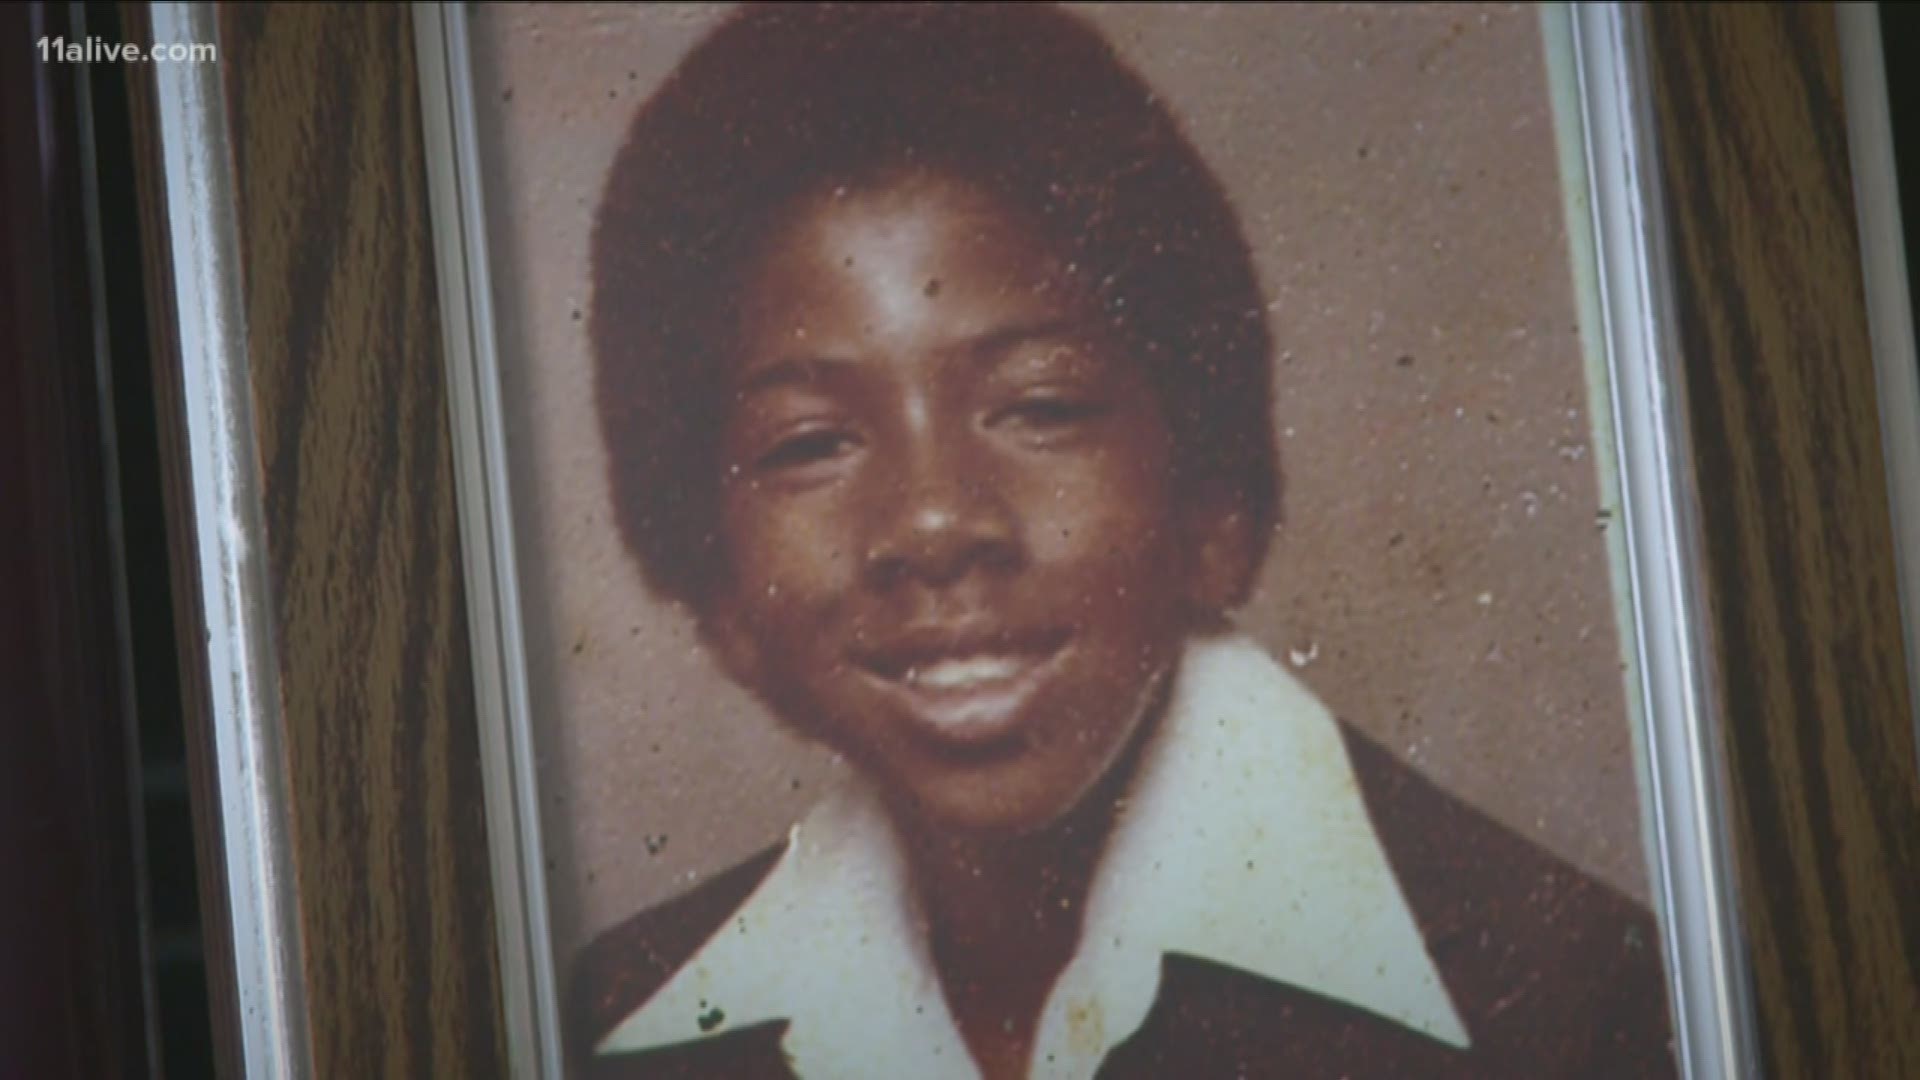 Alfred Evans was 13 years old and had just graduated the 7th grade in 1979, before his life was cut short.